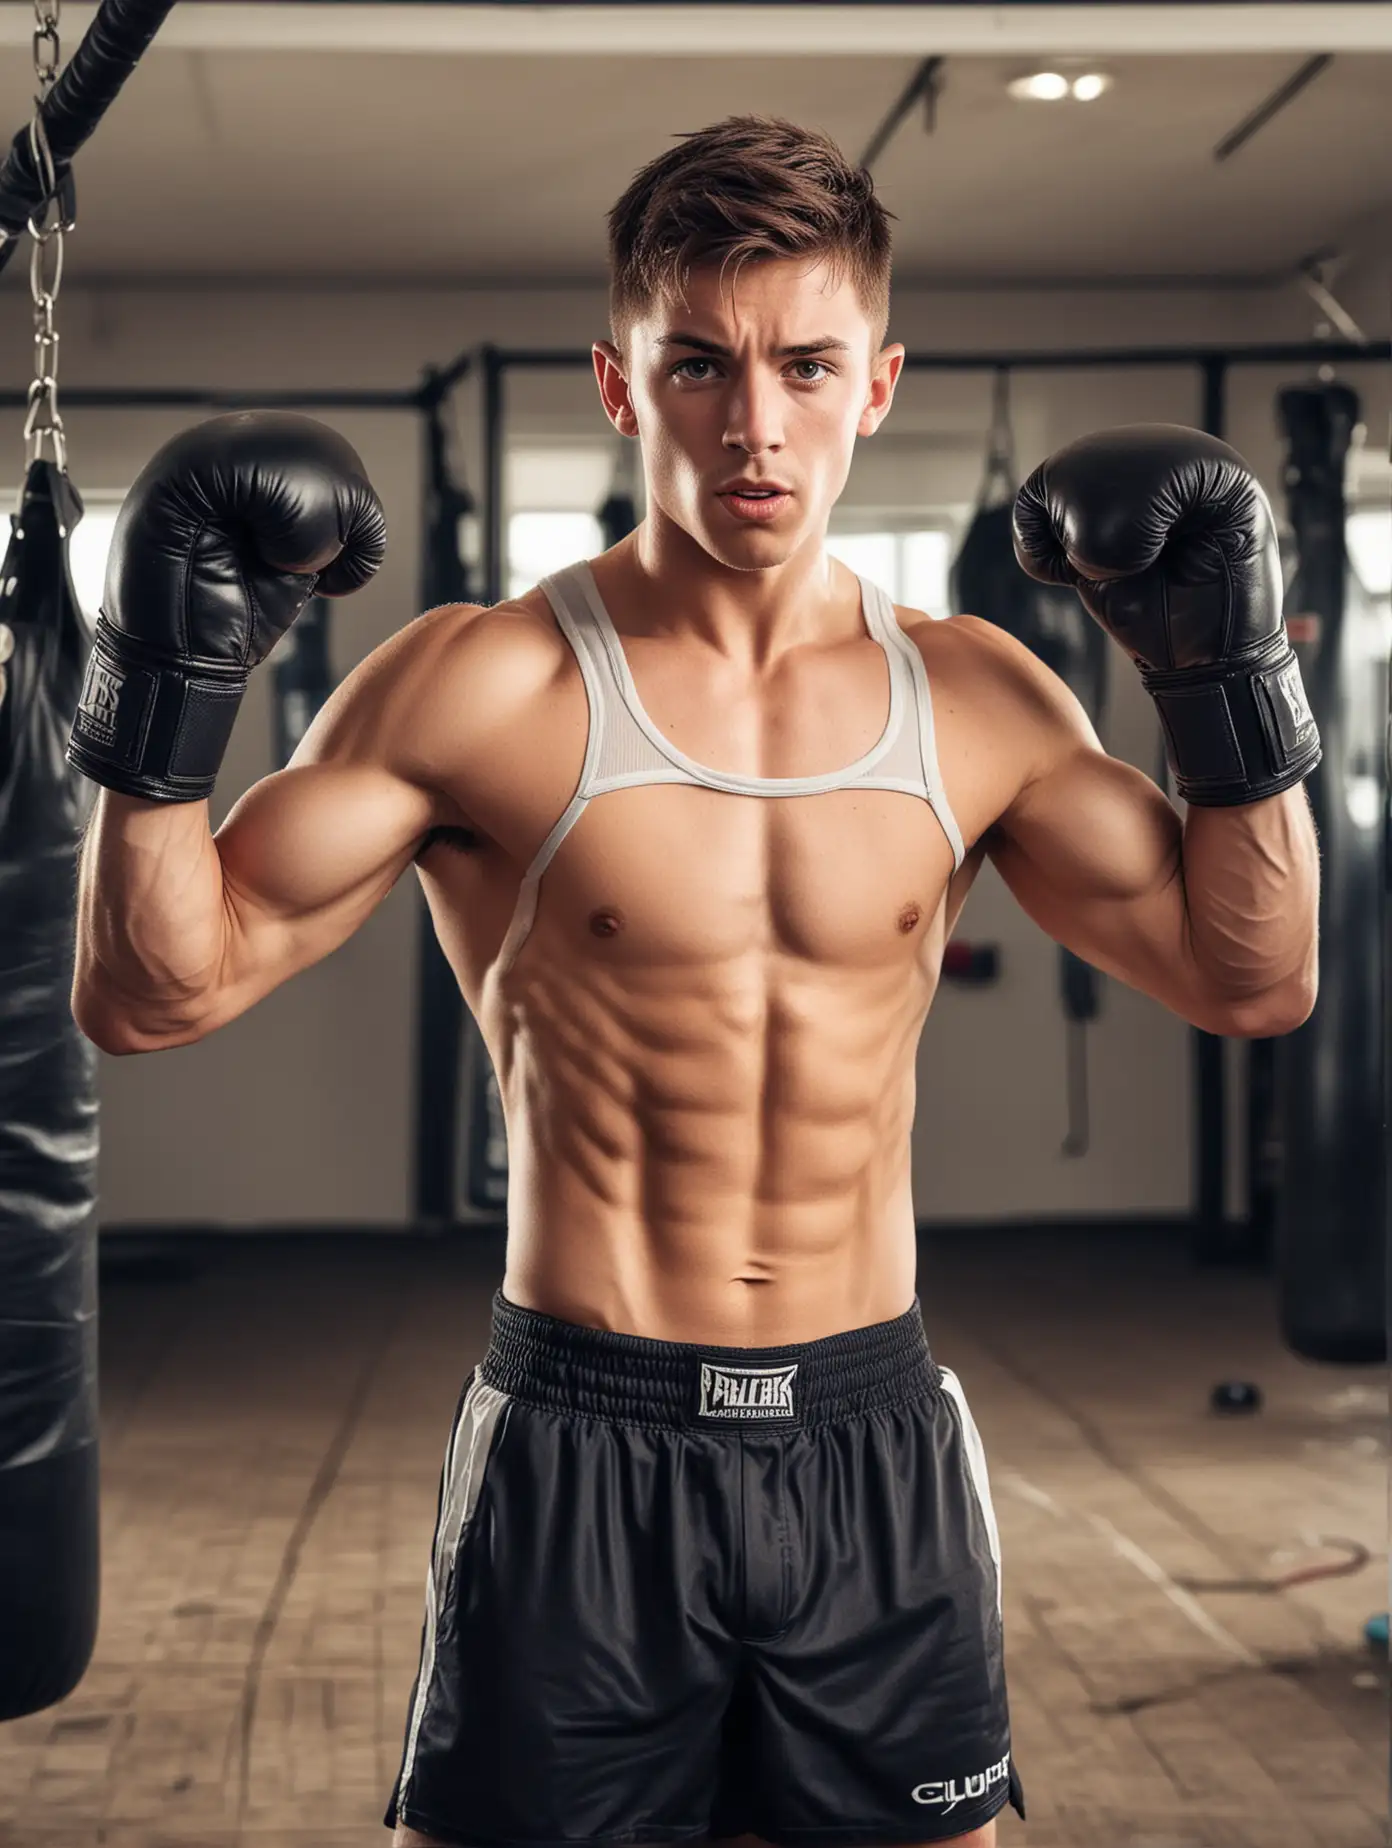 Handsome boy, British, in the gym, looking fit, wearing a tank top, sexy figure, arms raised fighting action, wearing boxing gloves, offensive action, perfect muscles, facing the camera, professional photography, full body shot